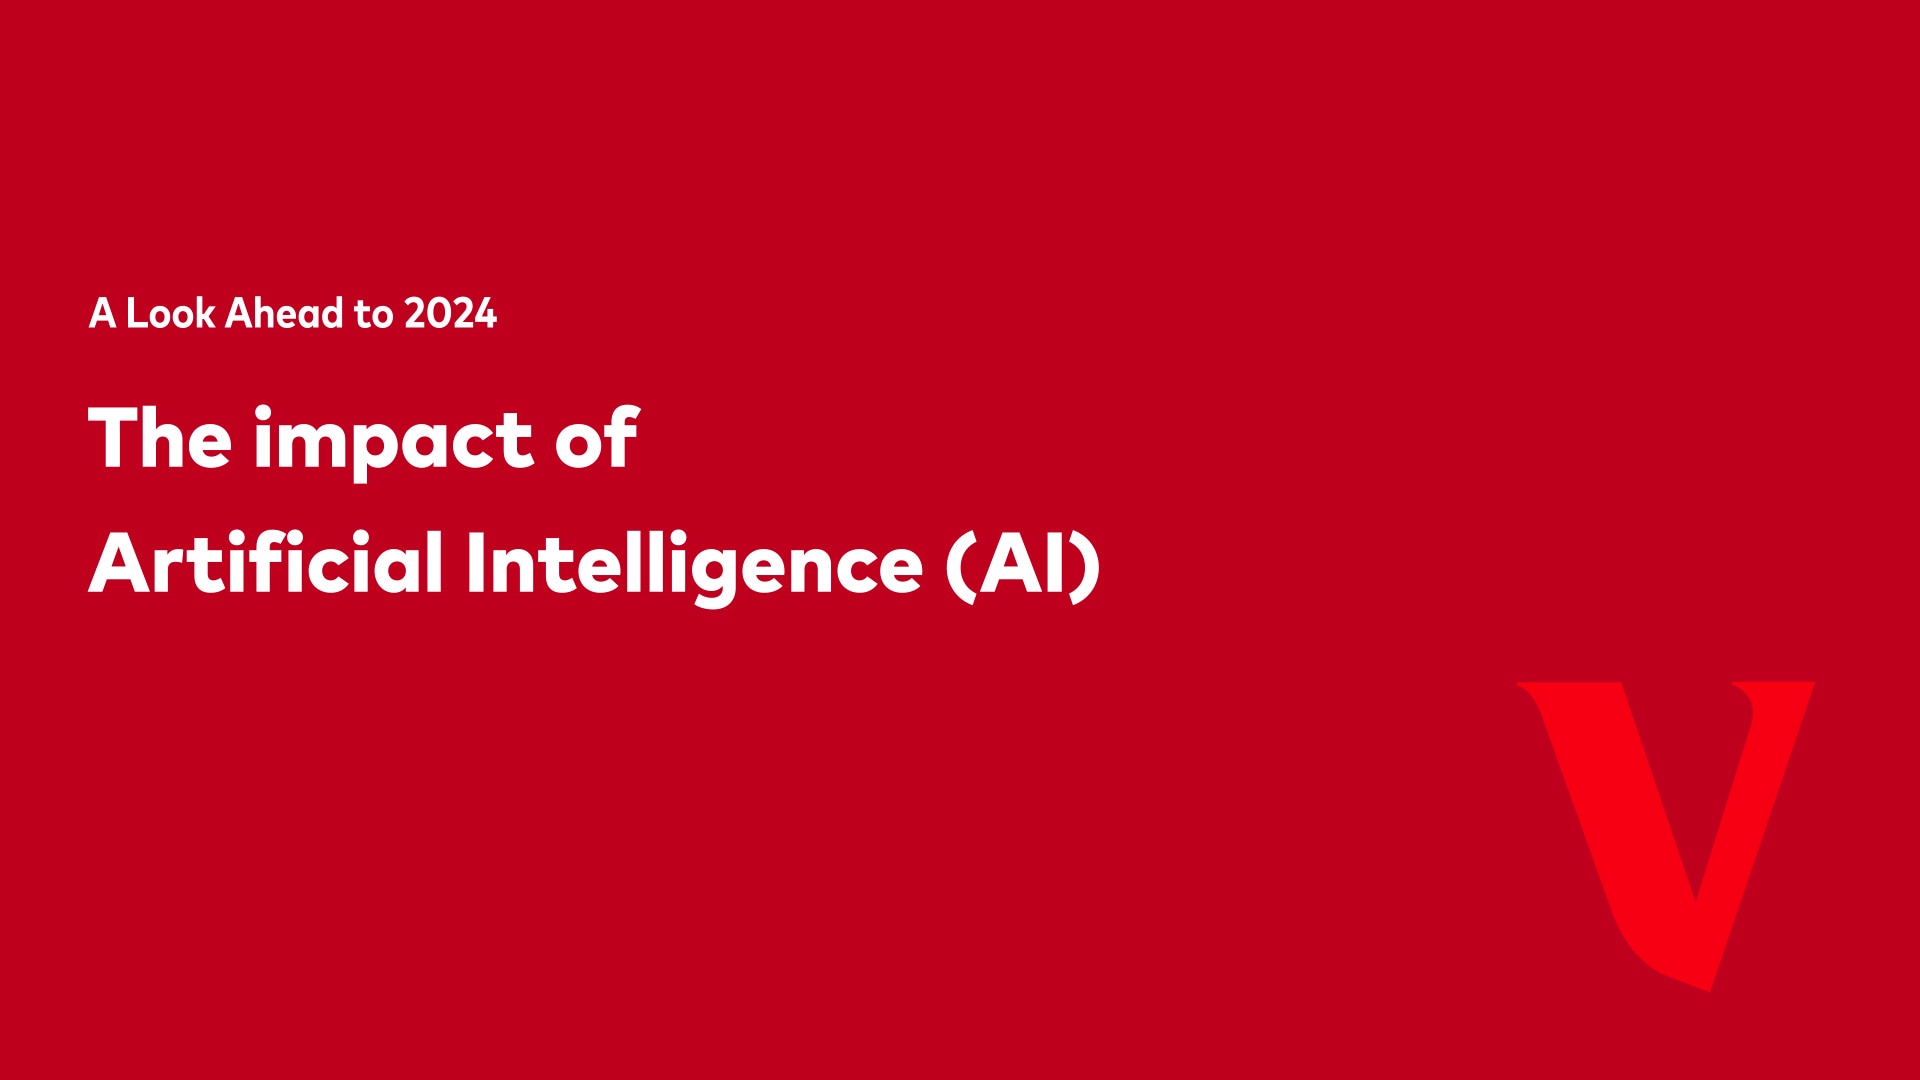 A Look Ahead to 2024: The impact of Artificial Intelligence (AI)